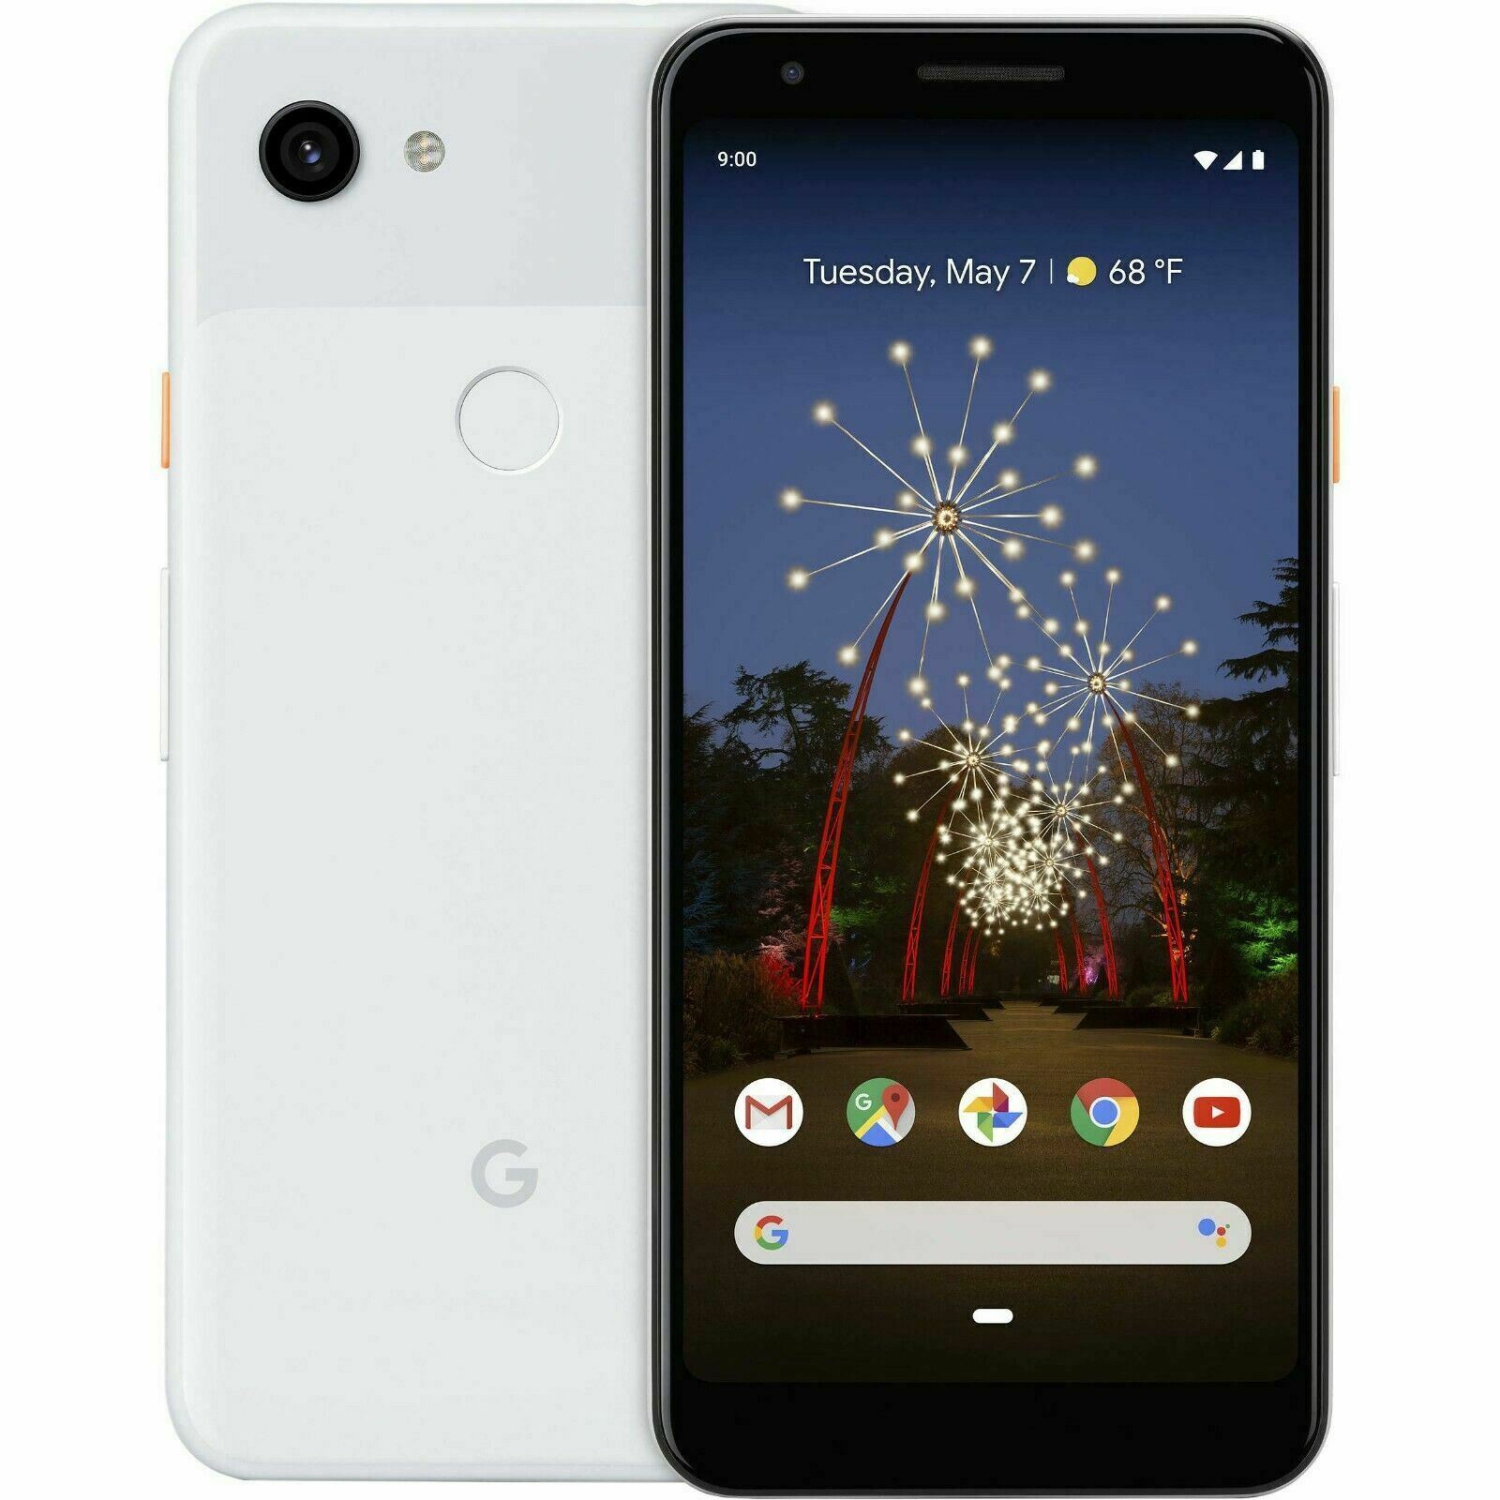 Google Pixel 3a XL 64GB Smartphone - Clearly White - Unlocked - New